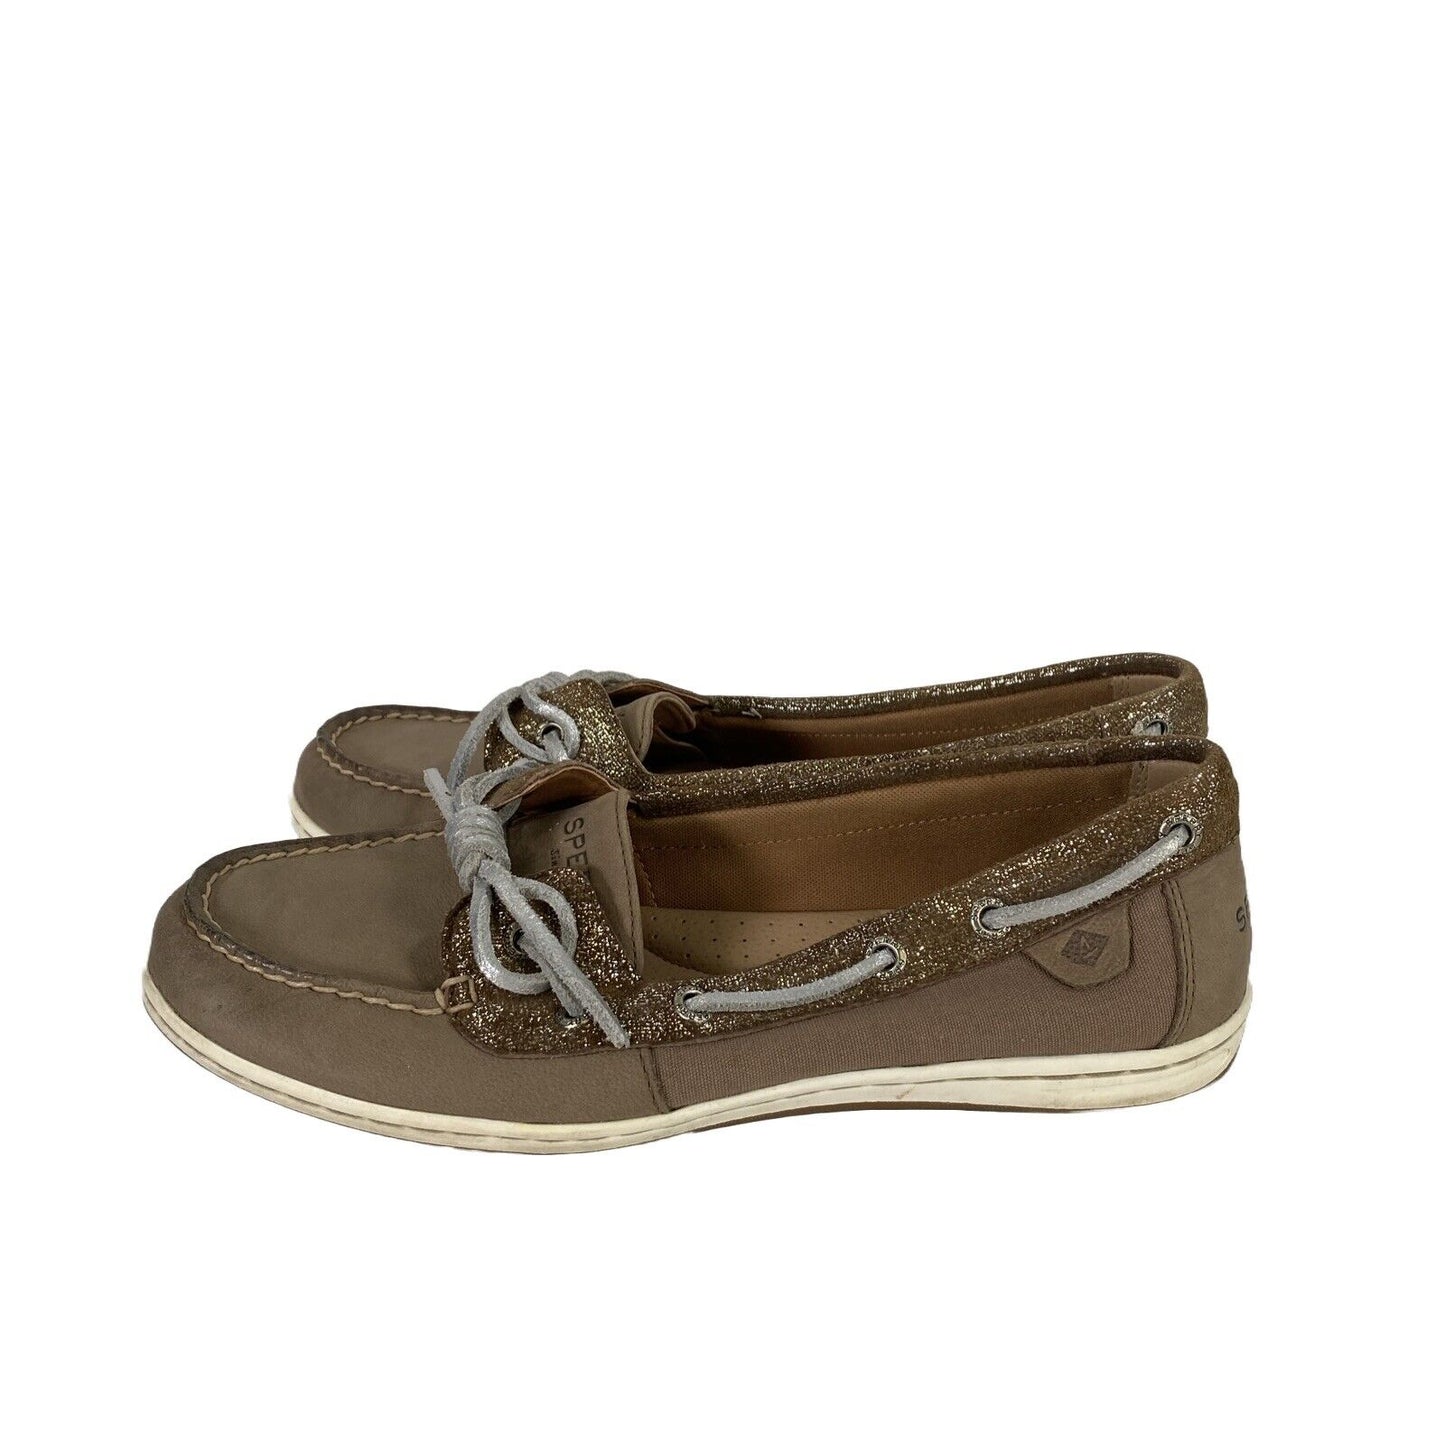 Sperry Women's Brown Metallic Leather Angelfish Boat Shoes - 8.5